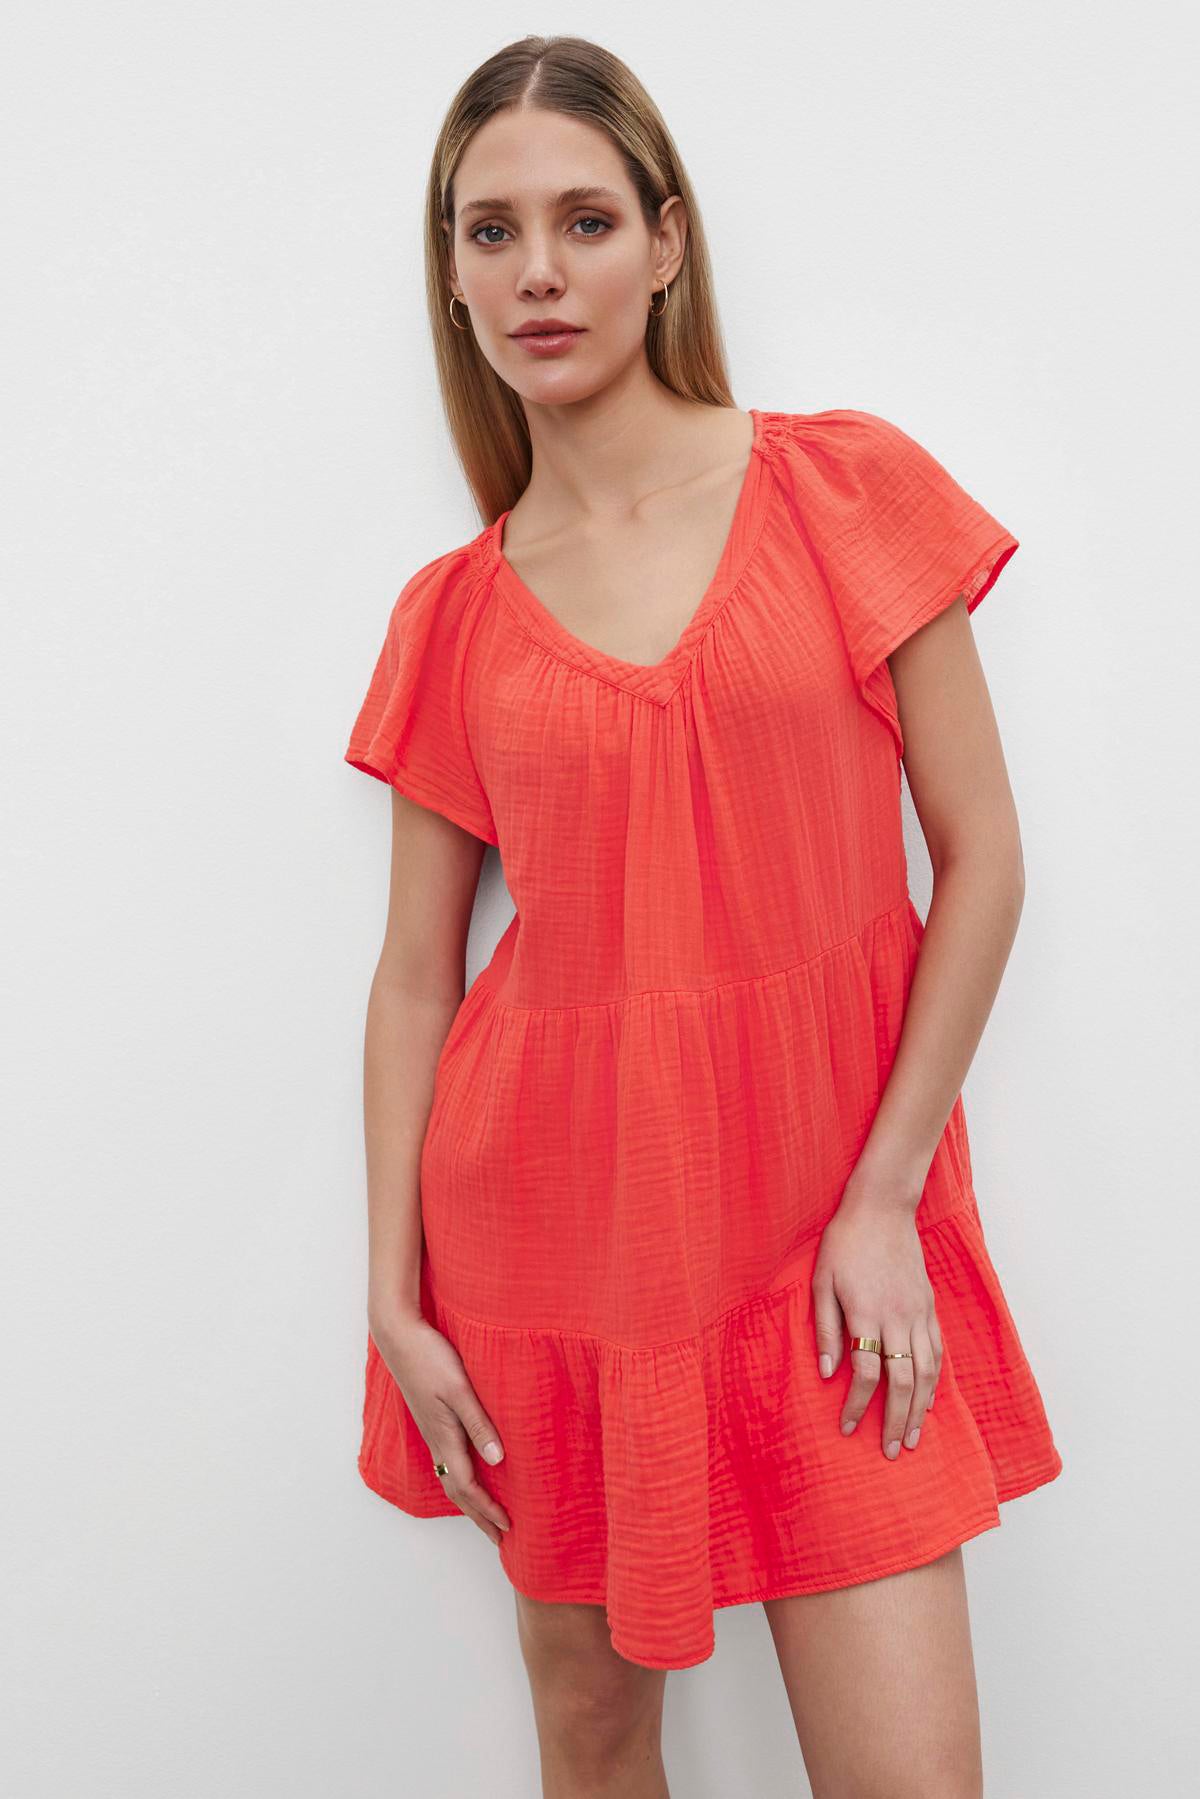   A woman in a bright orange, short ruffled Eleanor Cotton Gauze Tiered Dress by Velvet by Graham & Spencer standing against a white background, looking directly at the camera. 